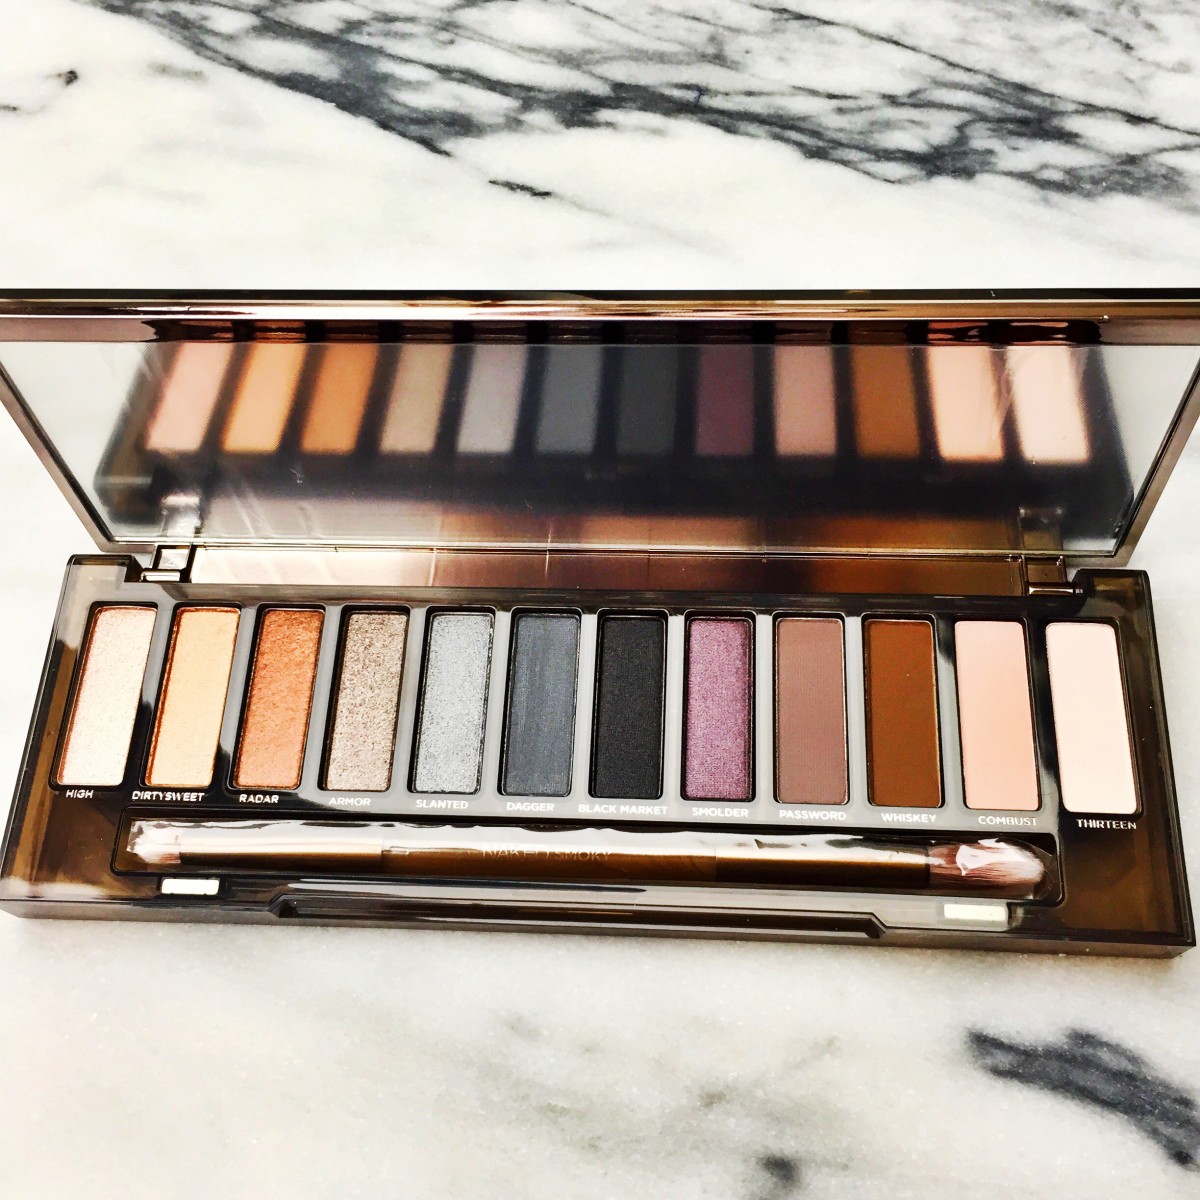 NEW: Urban Decay Naked Smoky Palette Is Available July 8